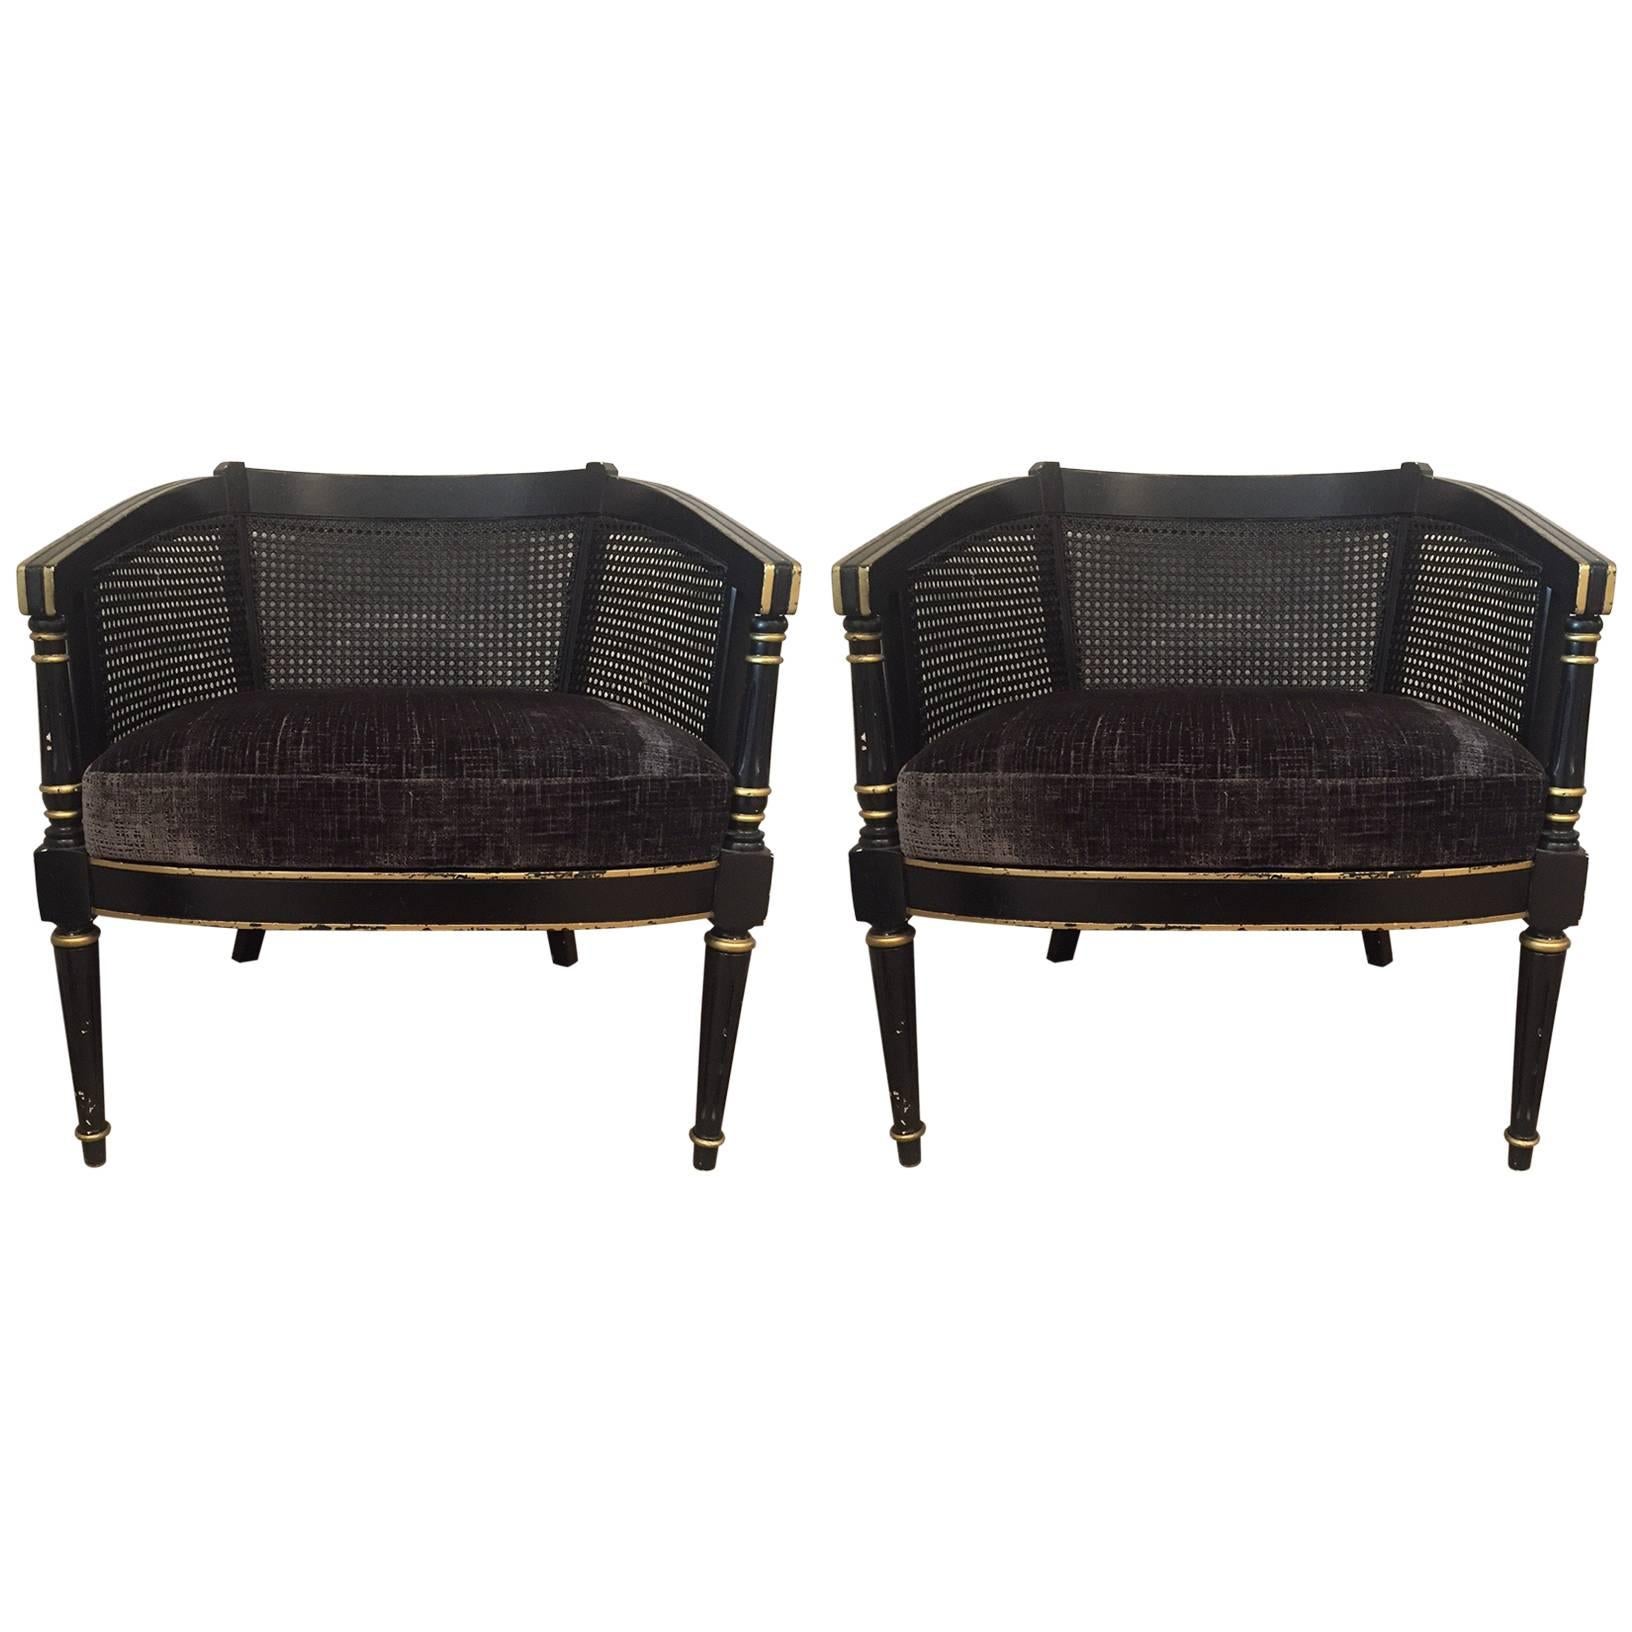 Pair of 20th Century Empire-Style Chairs